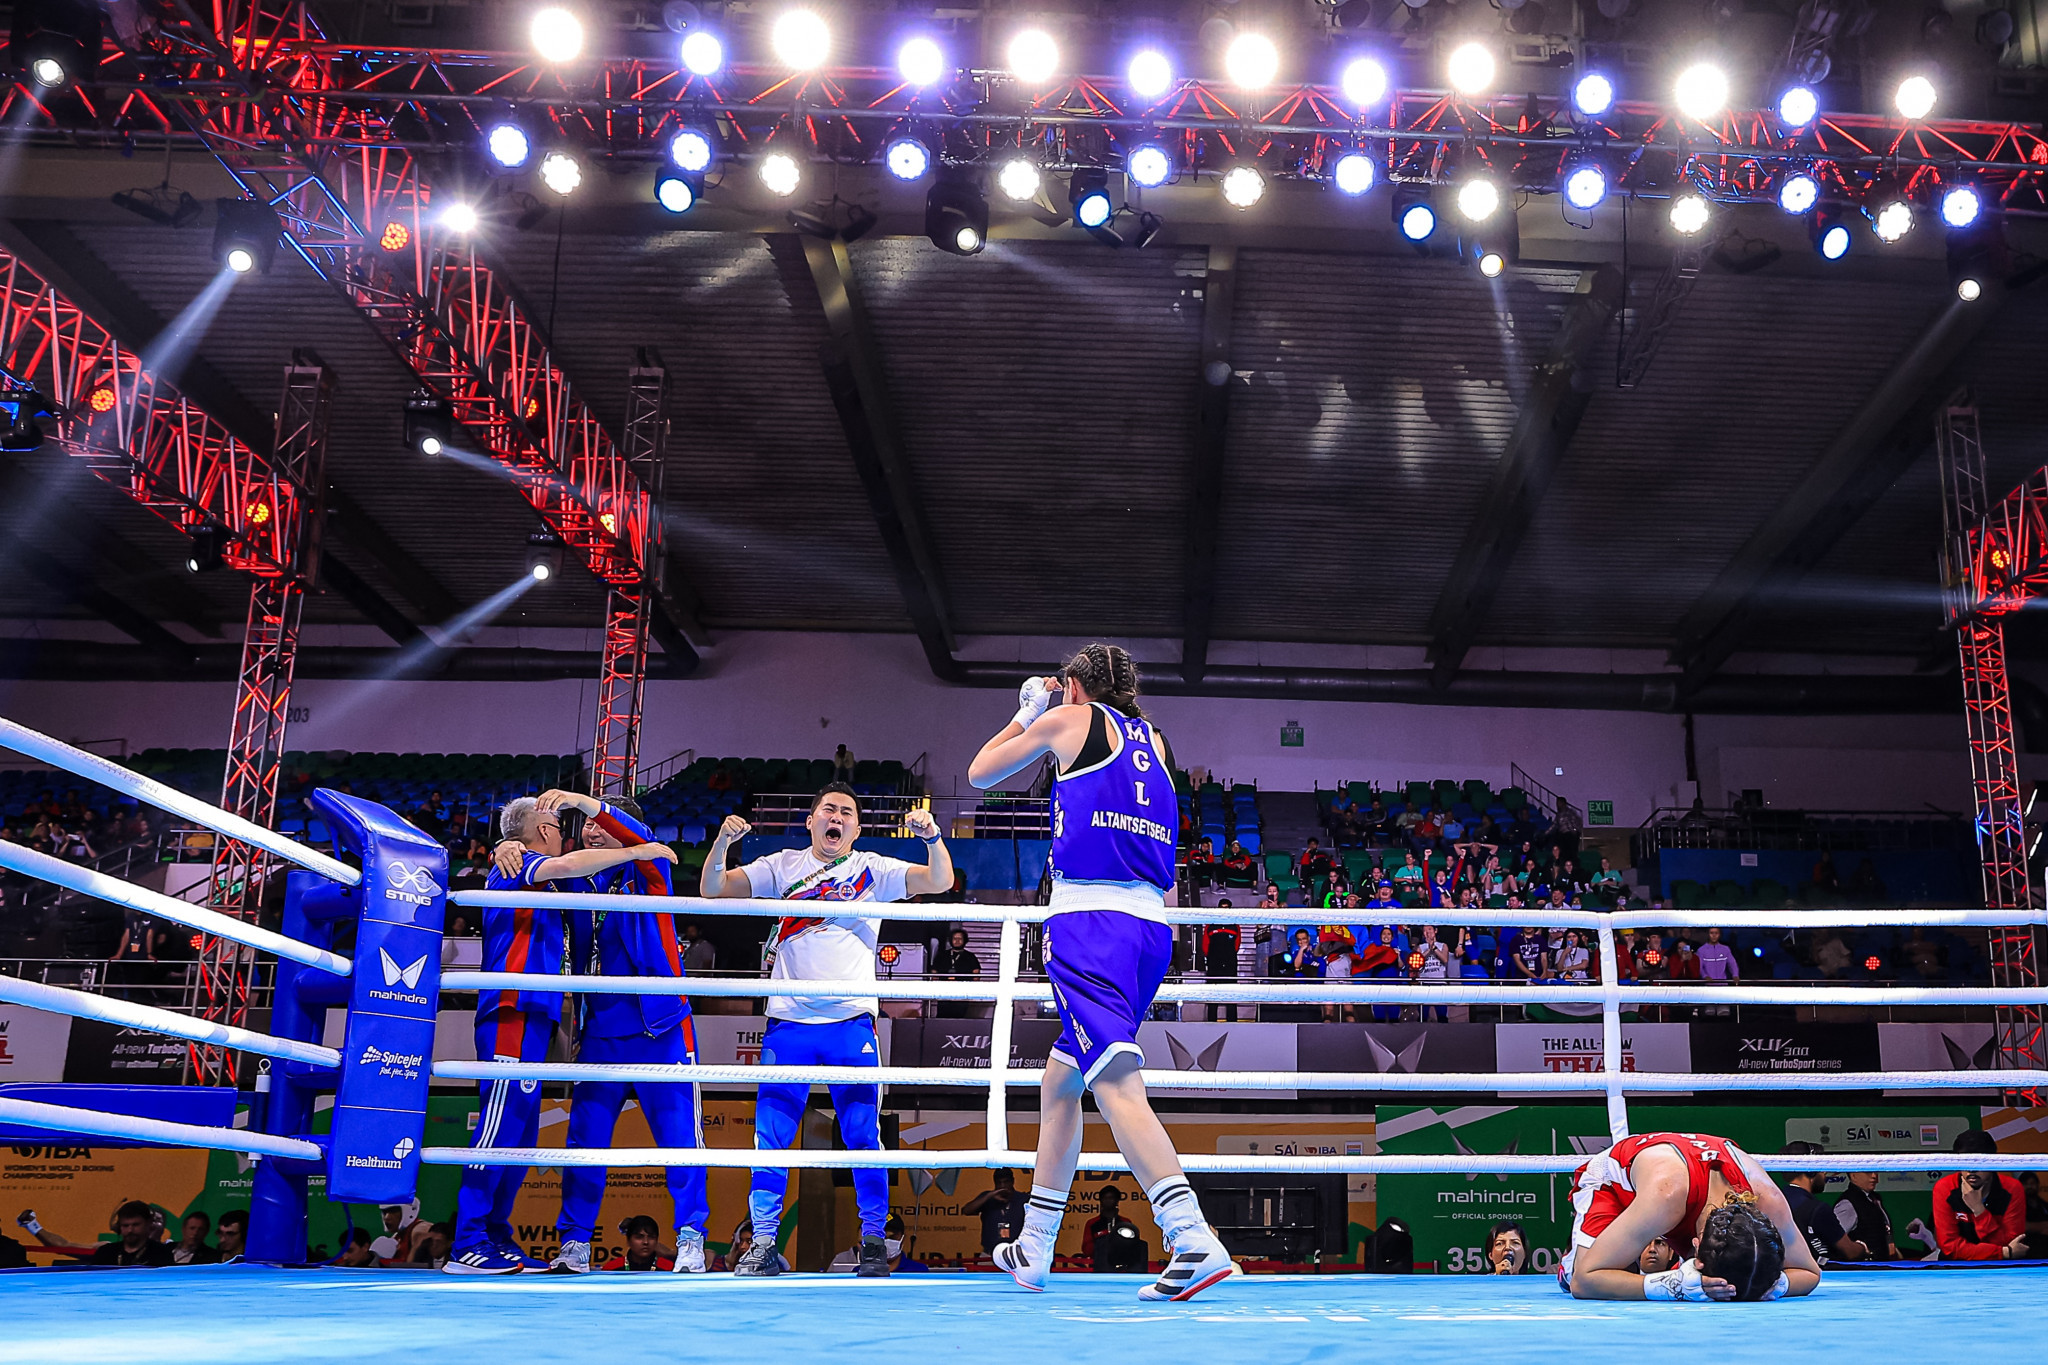 Altantsetseg Lutsaikhan of Mongolia looks to join in with the celebrations while Farzona Fozilova sinks to the ground following her quarter-final minimumweight defeat ©IBA